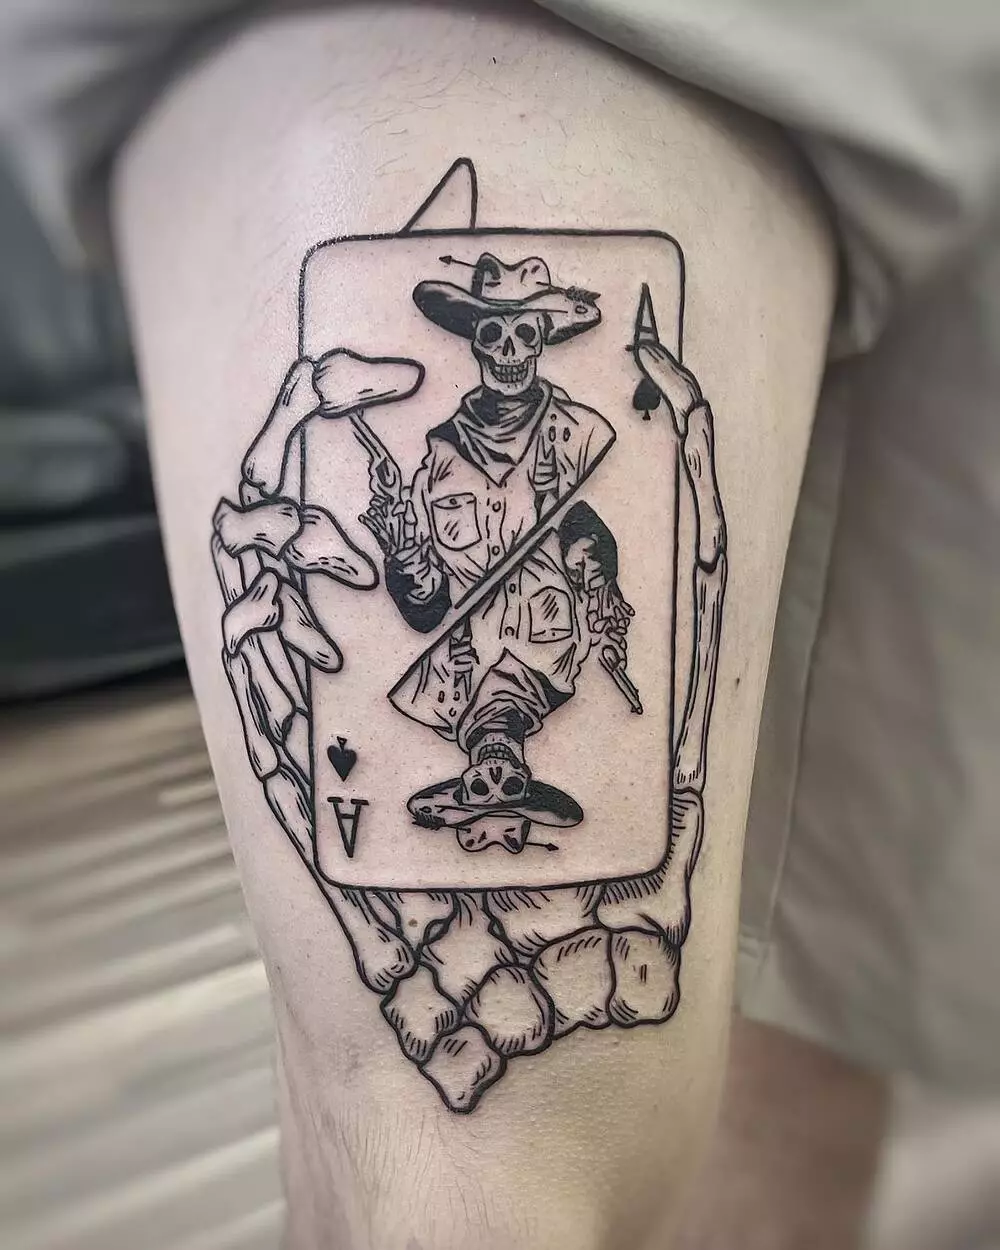 A Close-up Image of Skeleton Hand Holding Card Fine Line Tattoo